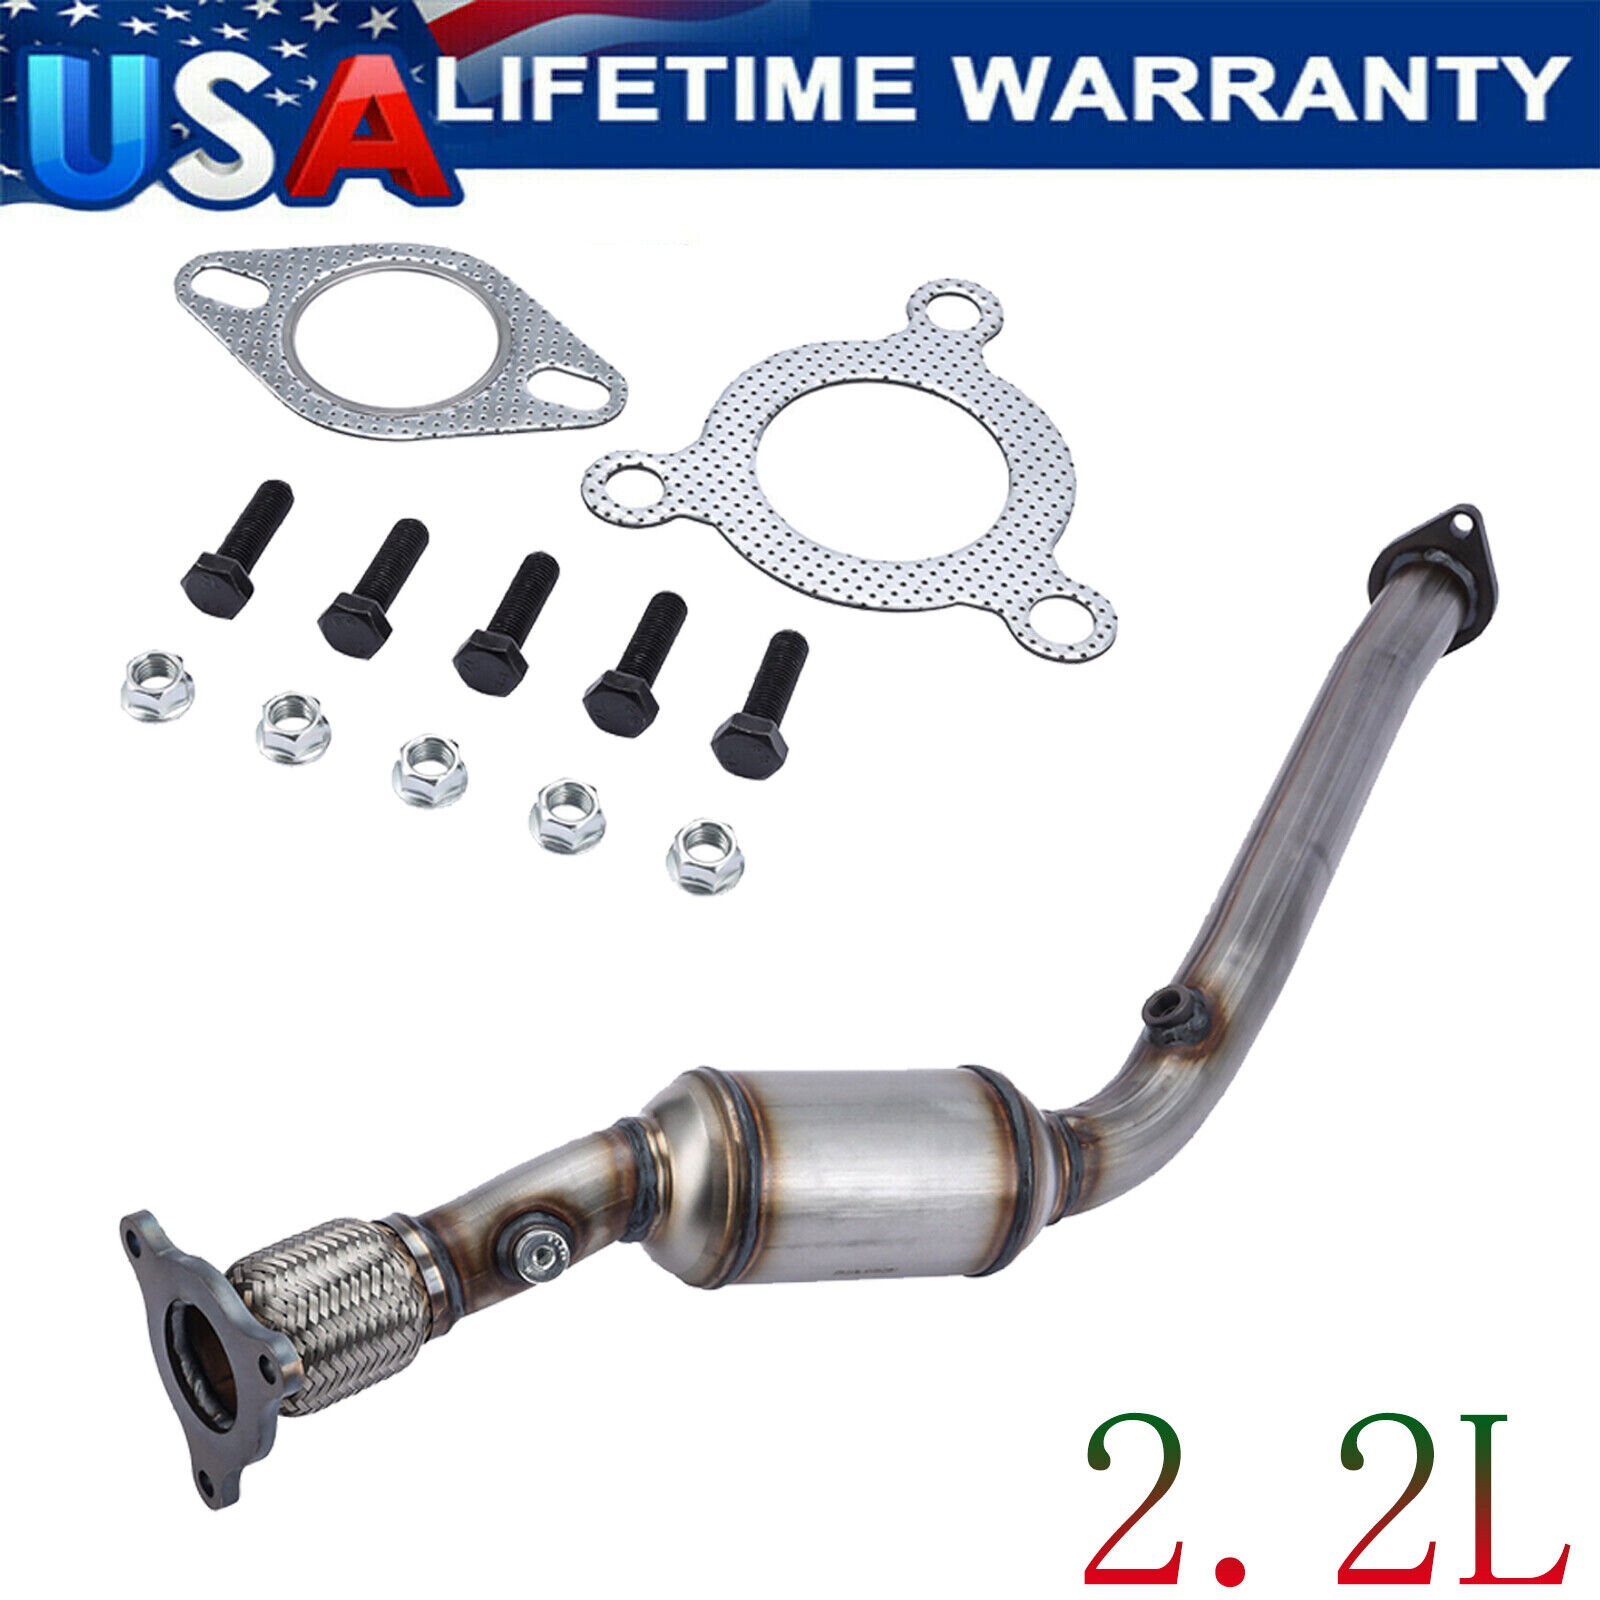 54807 Flex Pipe Catalytic Converter For Saturn Ion Chevy Cobalt 2.2L 2005-2007